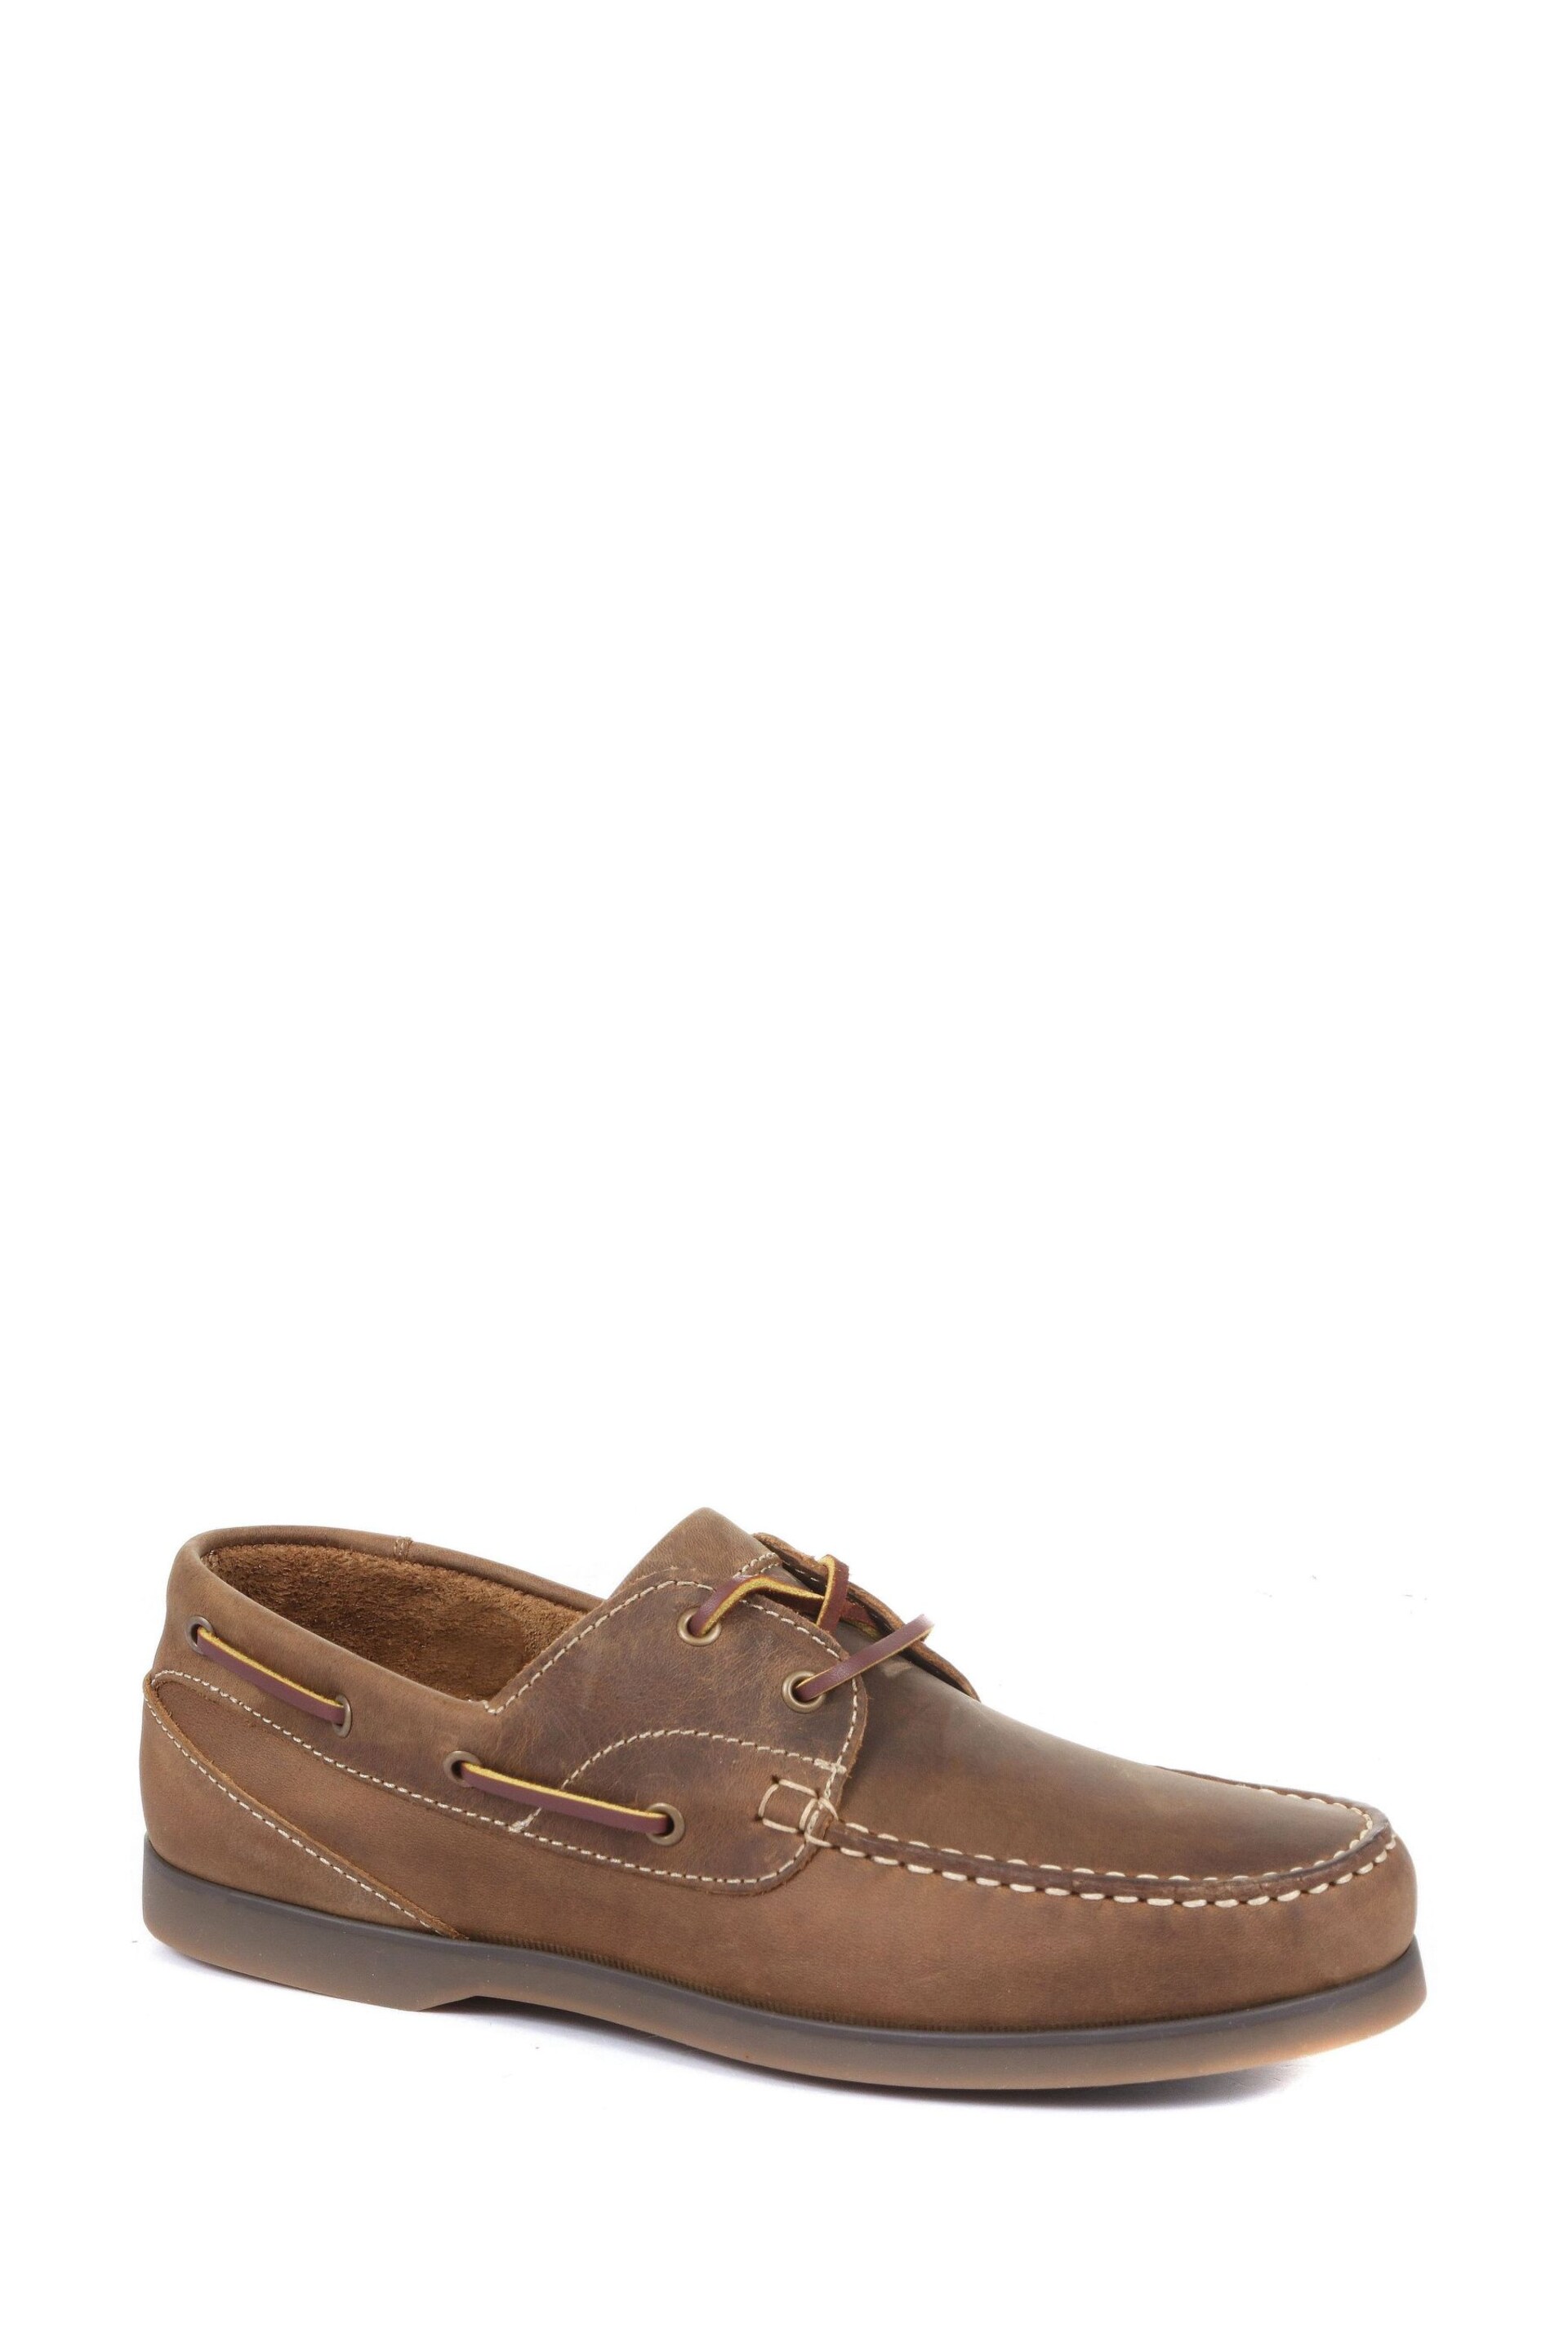 Jones Bootmaker Parsons Leather Boat Brown Shoes - Image 3 of 6